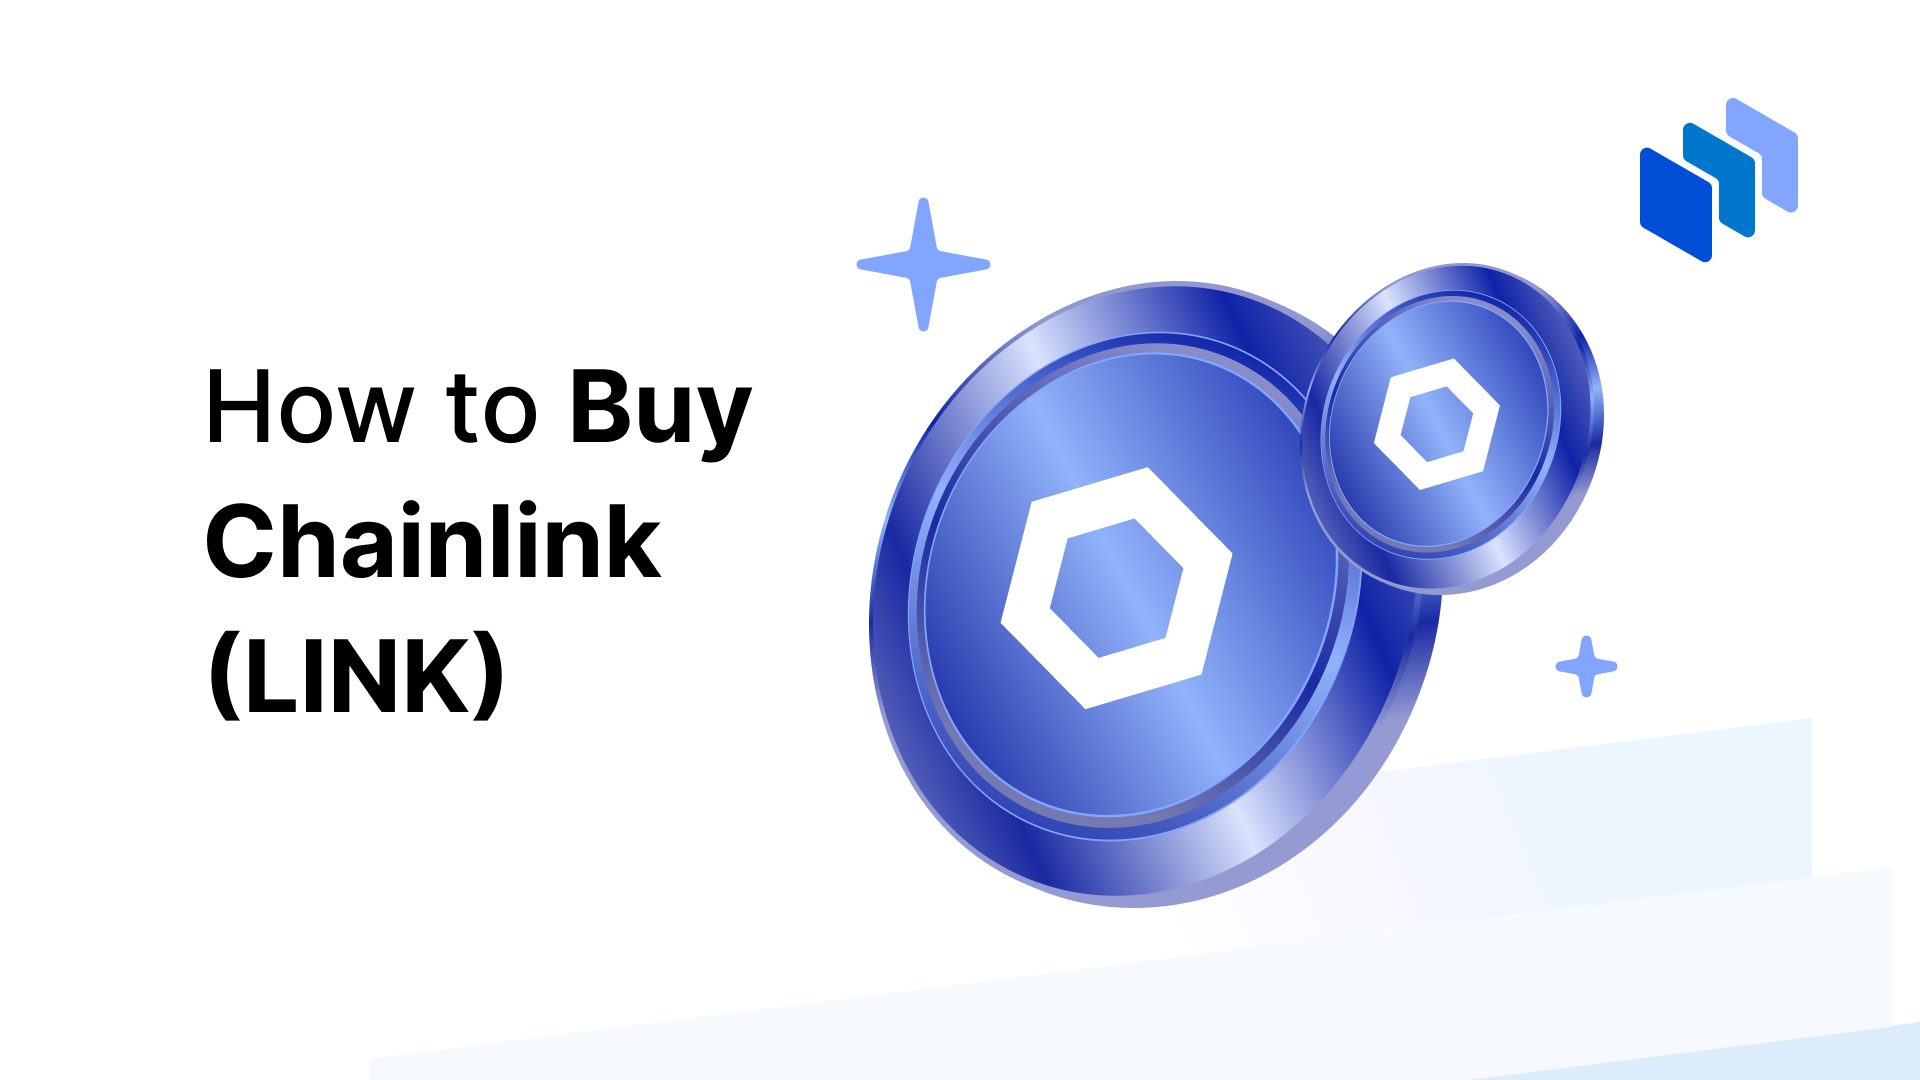 How to Buy Chainlink (LINK) in 3 Simple Steps | CoinJournal